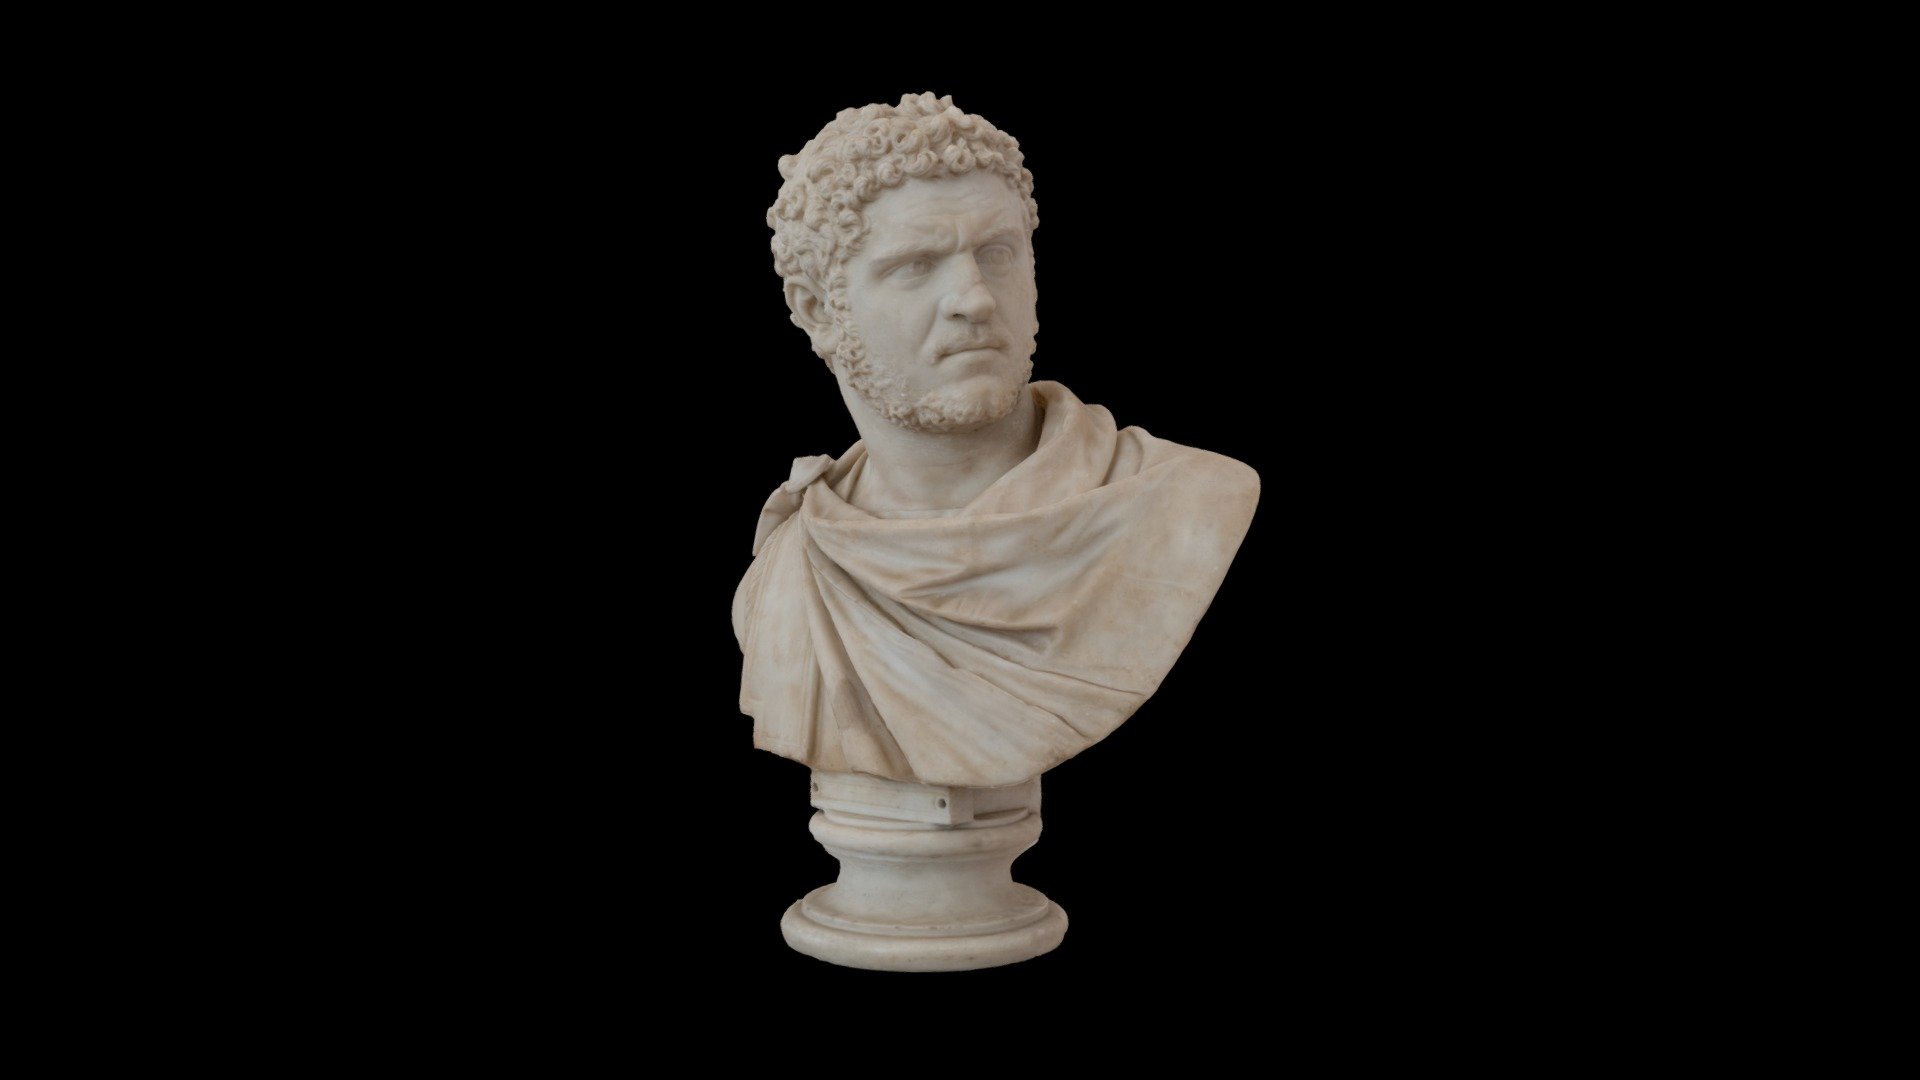 Caracalla was Roman emperor from 198 to 217 CE. After the death of their father, Septimius Severus, Caracalla briefly ruled with his brother, Geta, before having him assassinated by the Praetorian Guard in 211 CE.

Caracalla is often portrayed as a cruel and bloodthirsty tyrant by ancient sources. 

Caracalla lends his name to the monumental &ldquo;Baths of Caracalla